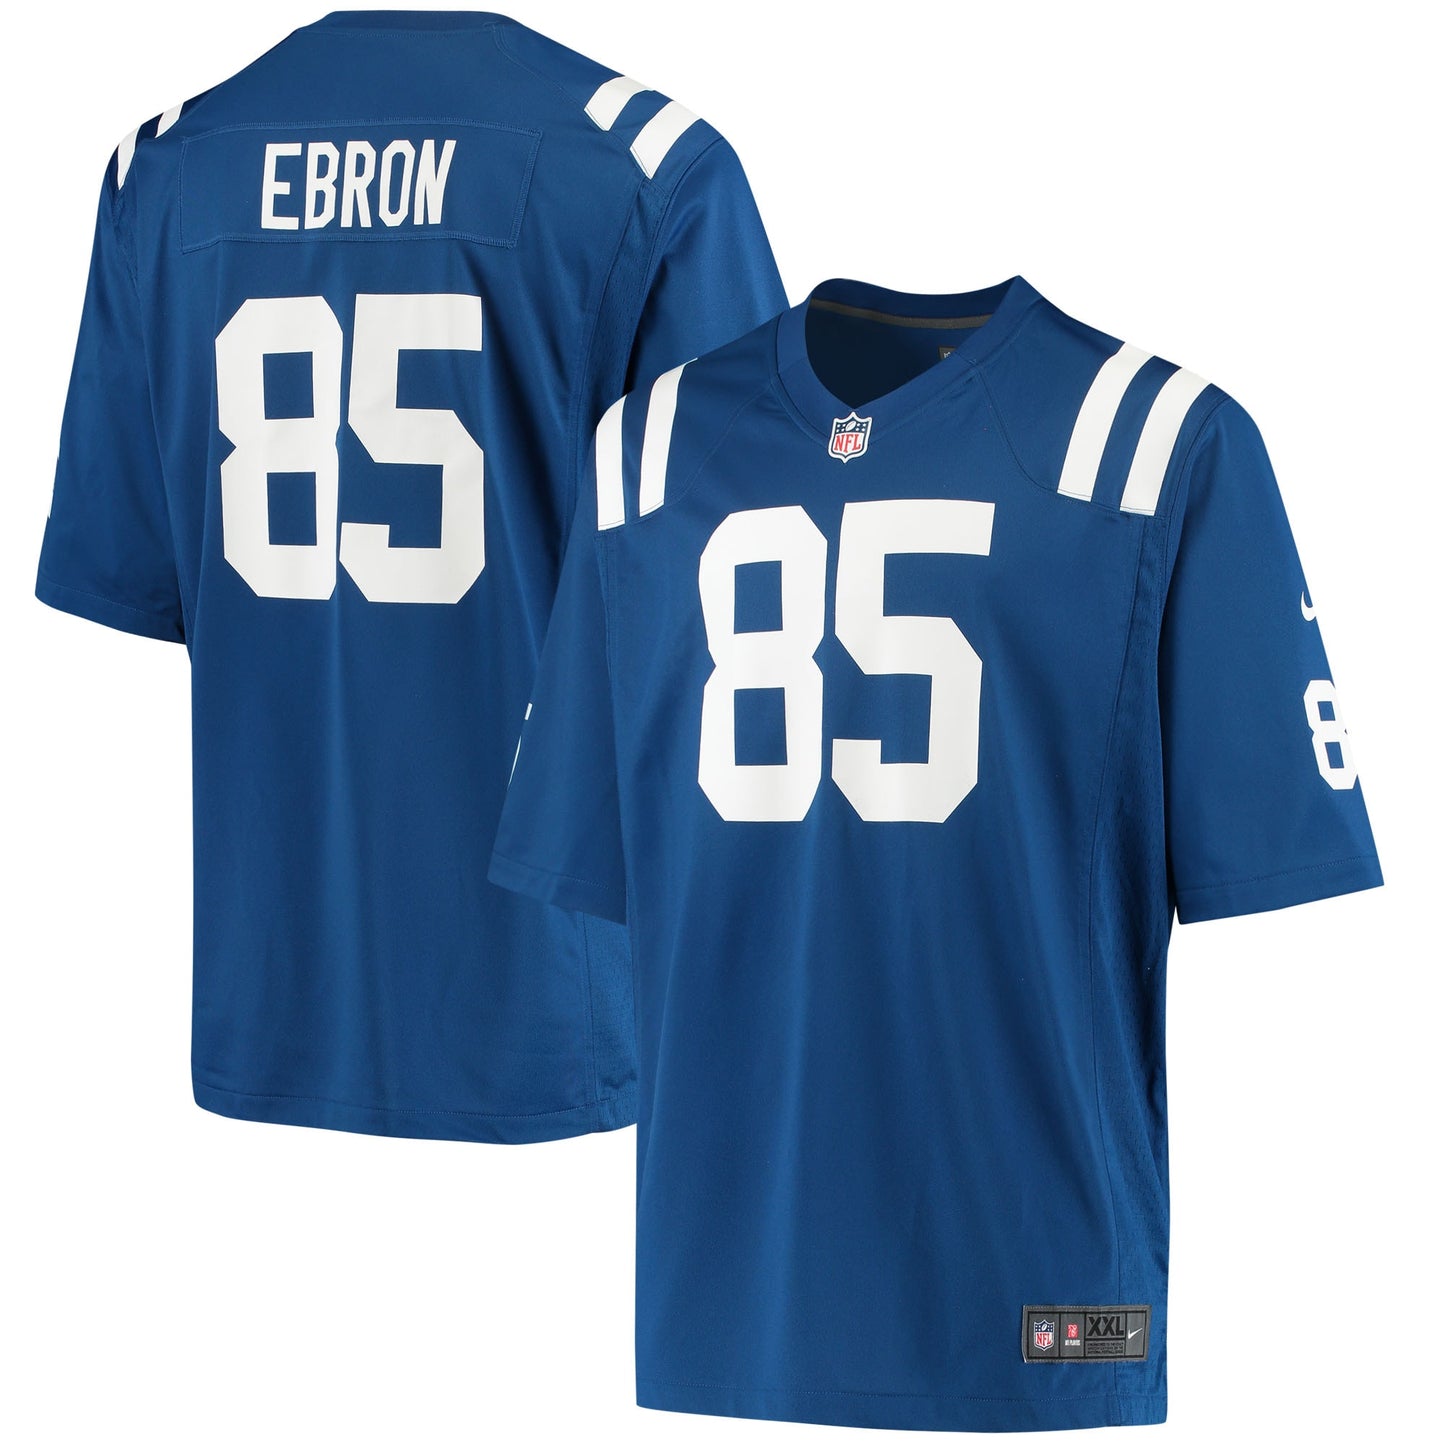 Eric Ebron Indianapolis Colts Nike Game Player Jersey - Royal